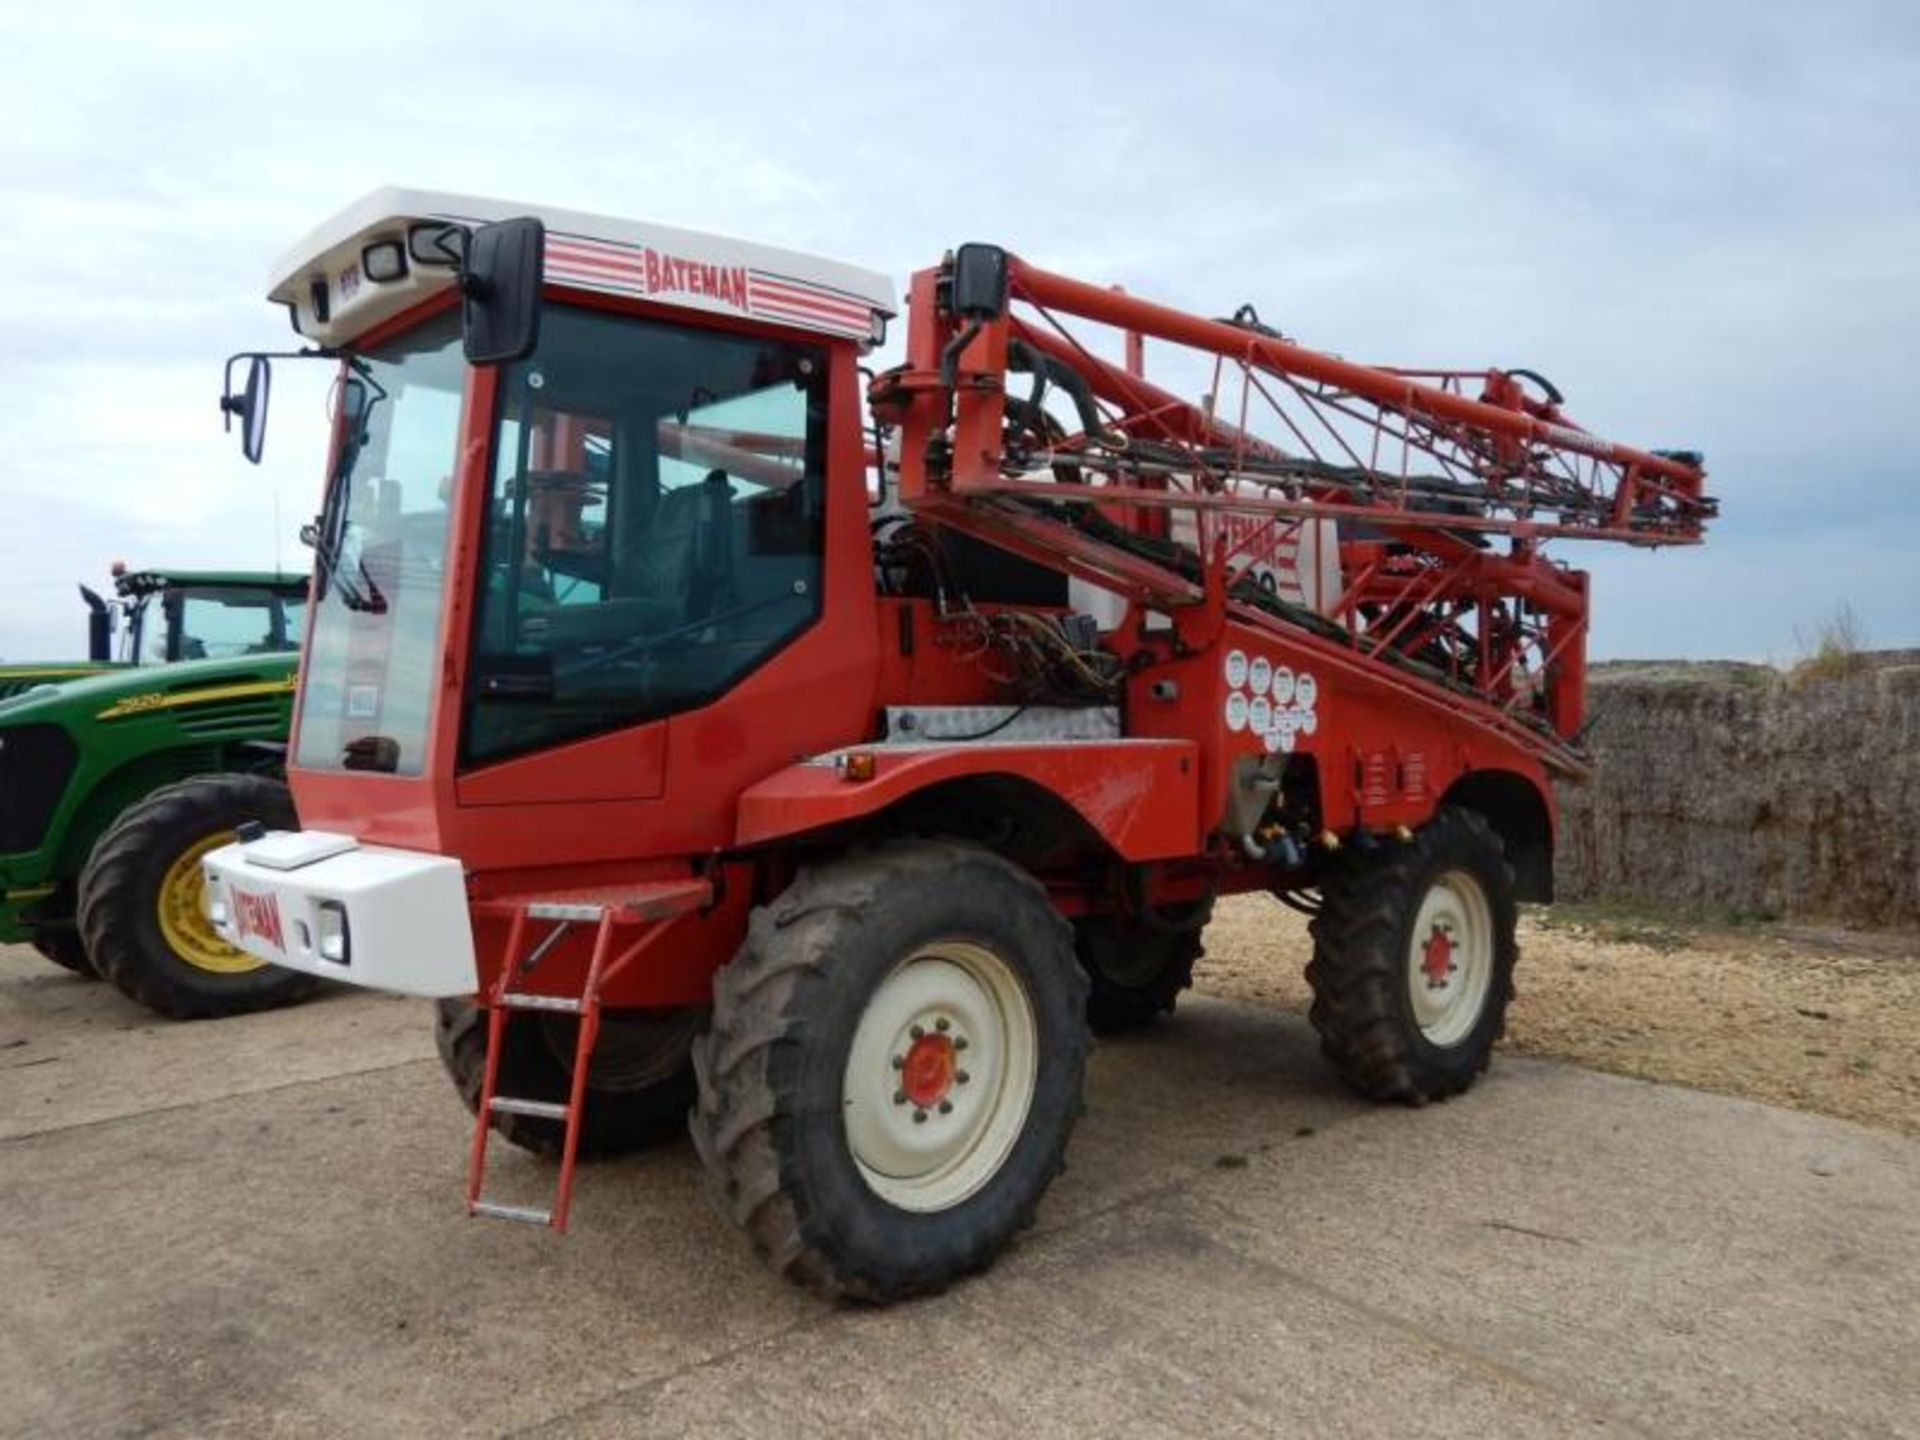 2005 BATEMAN RB25 Contour 4wd 4ws SELF-PROPELLED SPRAYER Fitted with John Deere 175hp 6cylinder - Image 2 of 8